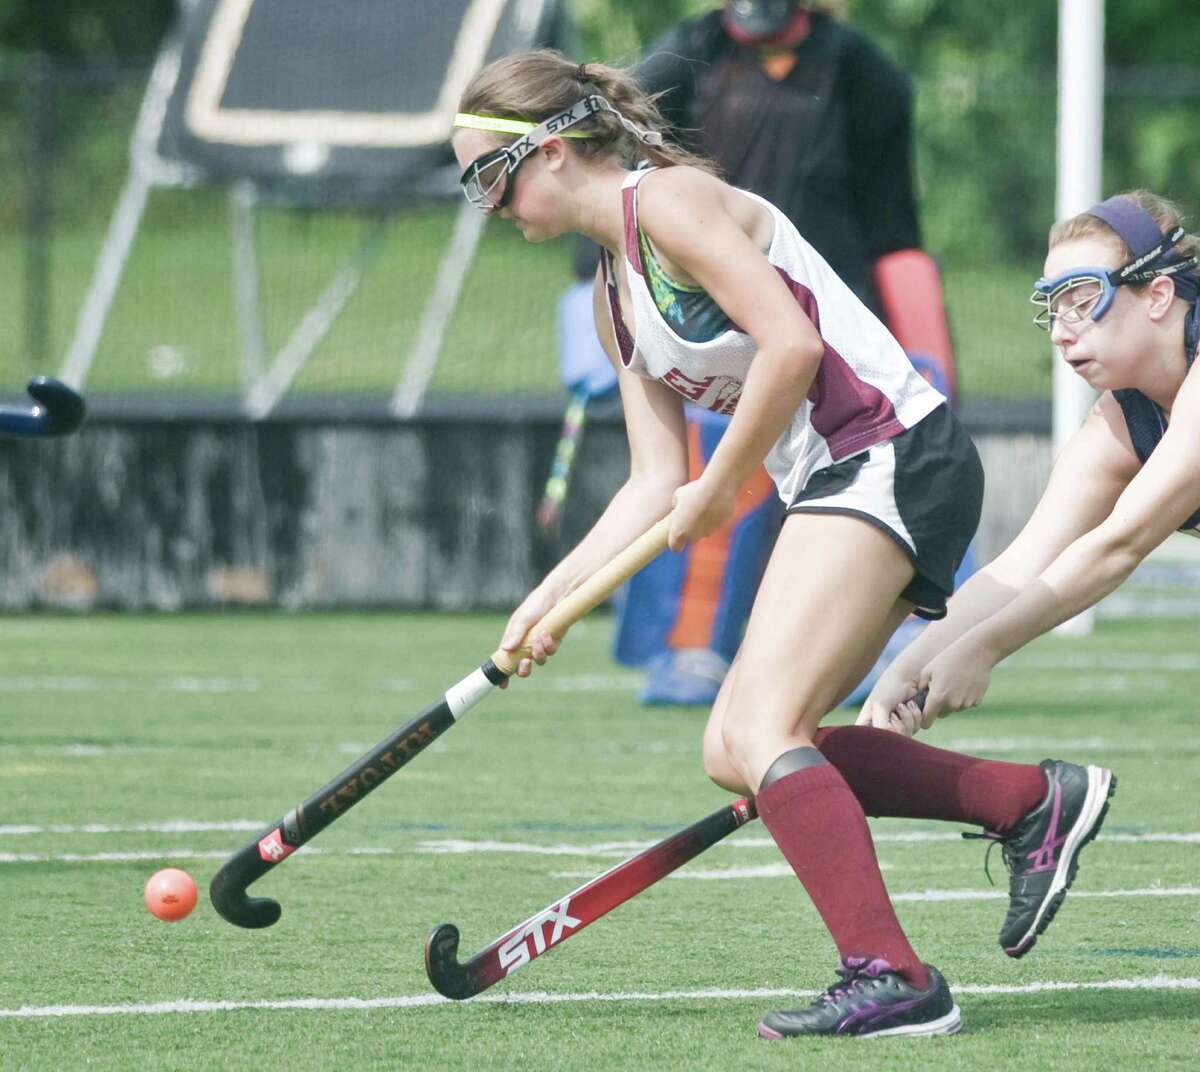 Bethel High School's Samantha Segiet moves the ball during the high school field hockey jamboree at Immaculate High School. Sunday, Aug. 30, 2015